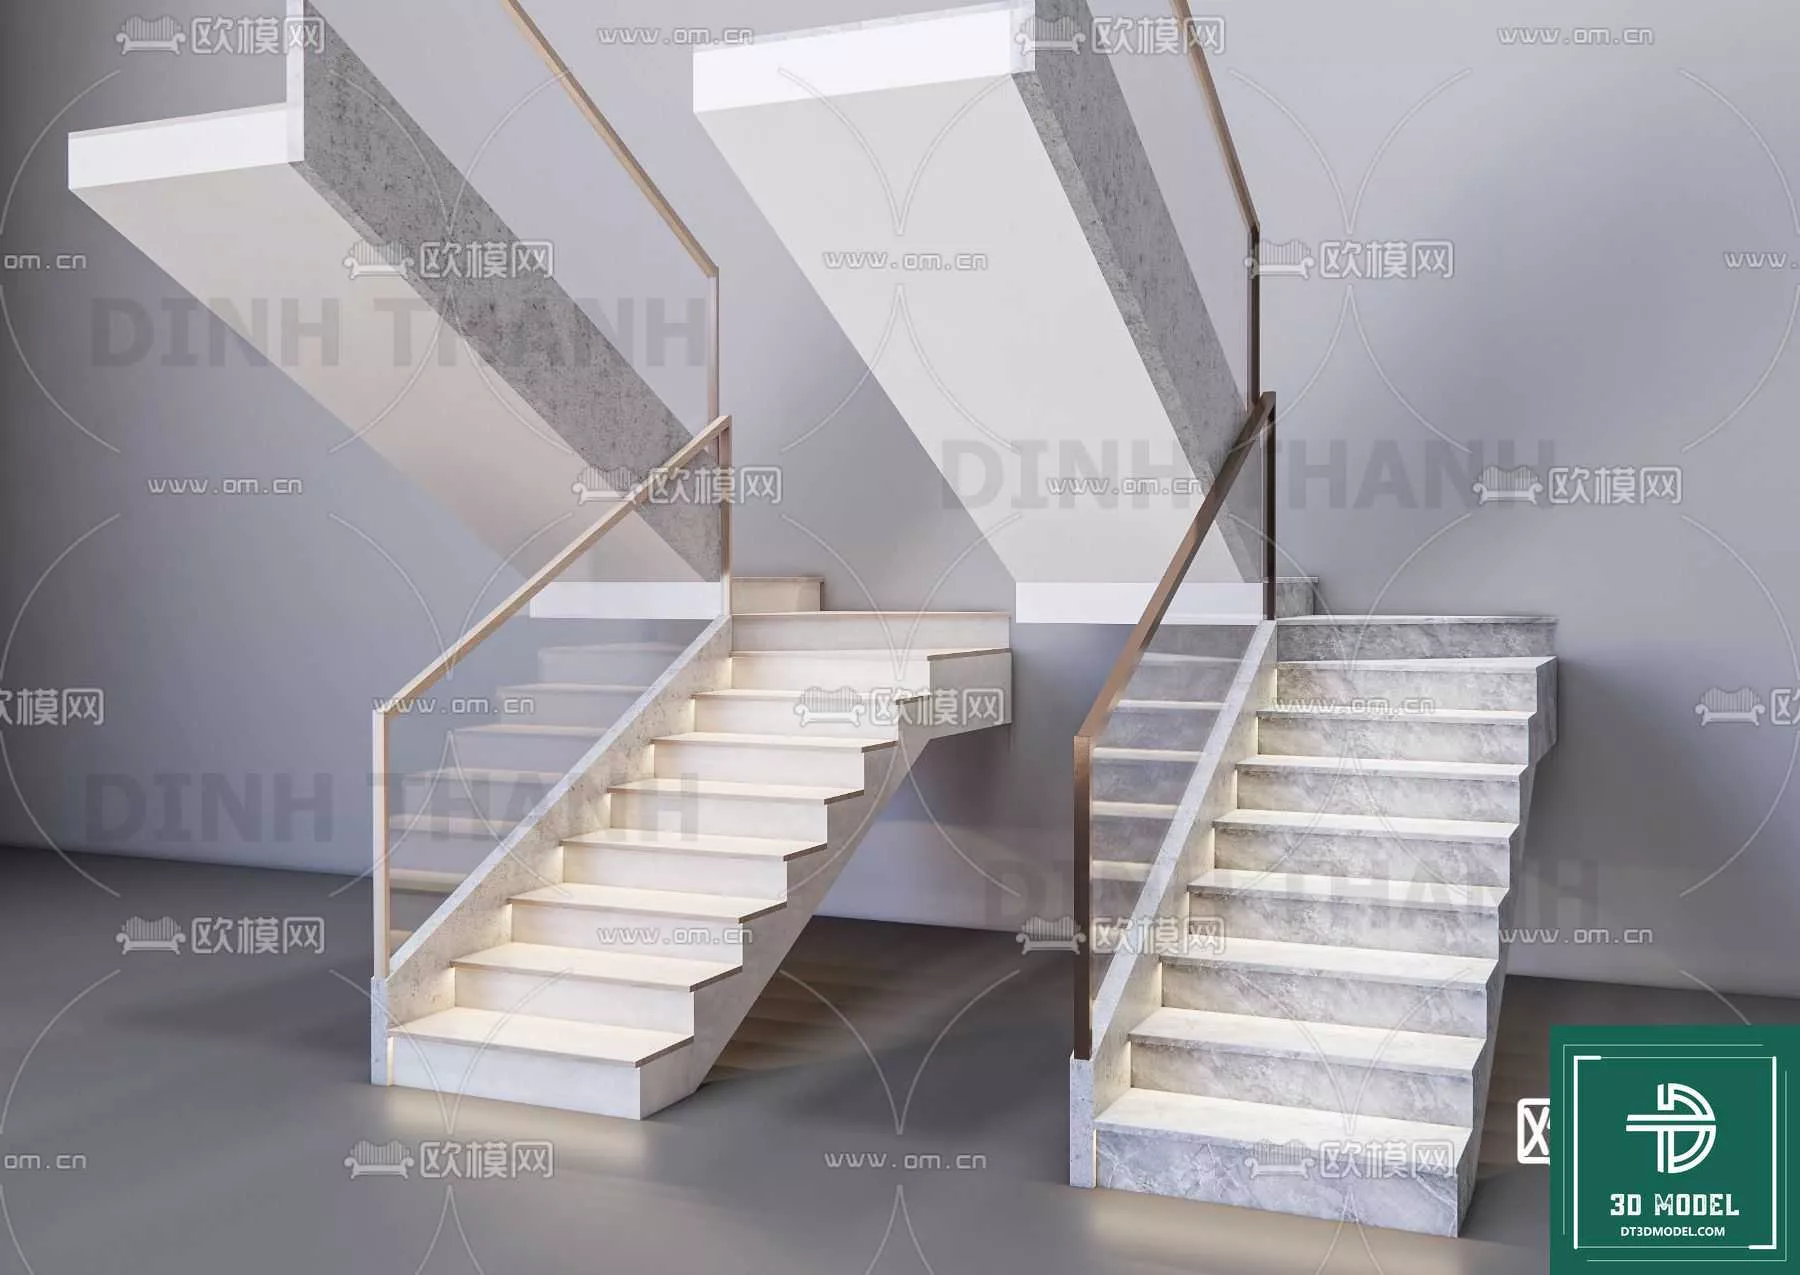 MODERN STAIR - SKETCHUP 3D MODEL - VRAY OR ENSCAPE - ID14187